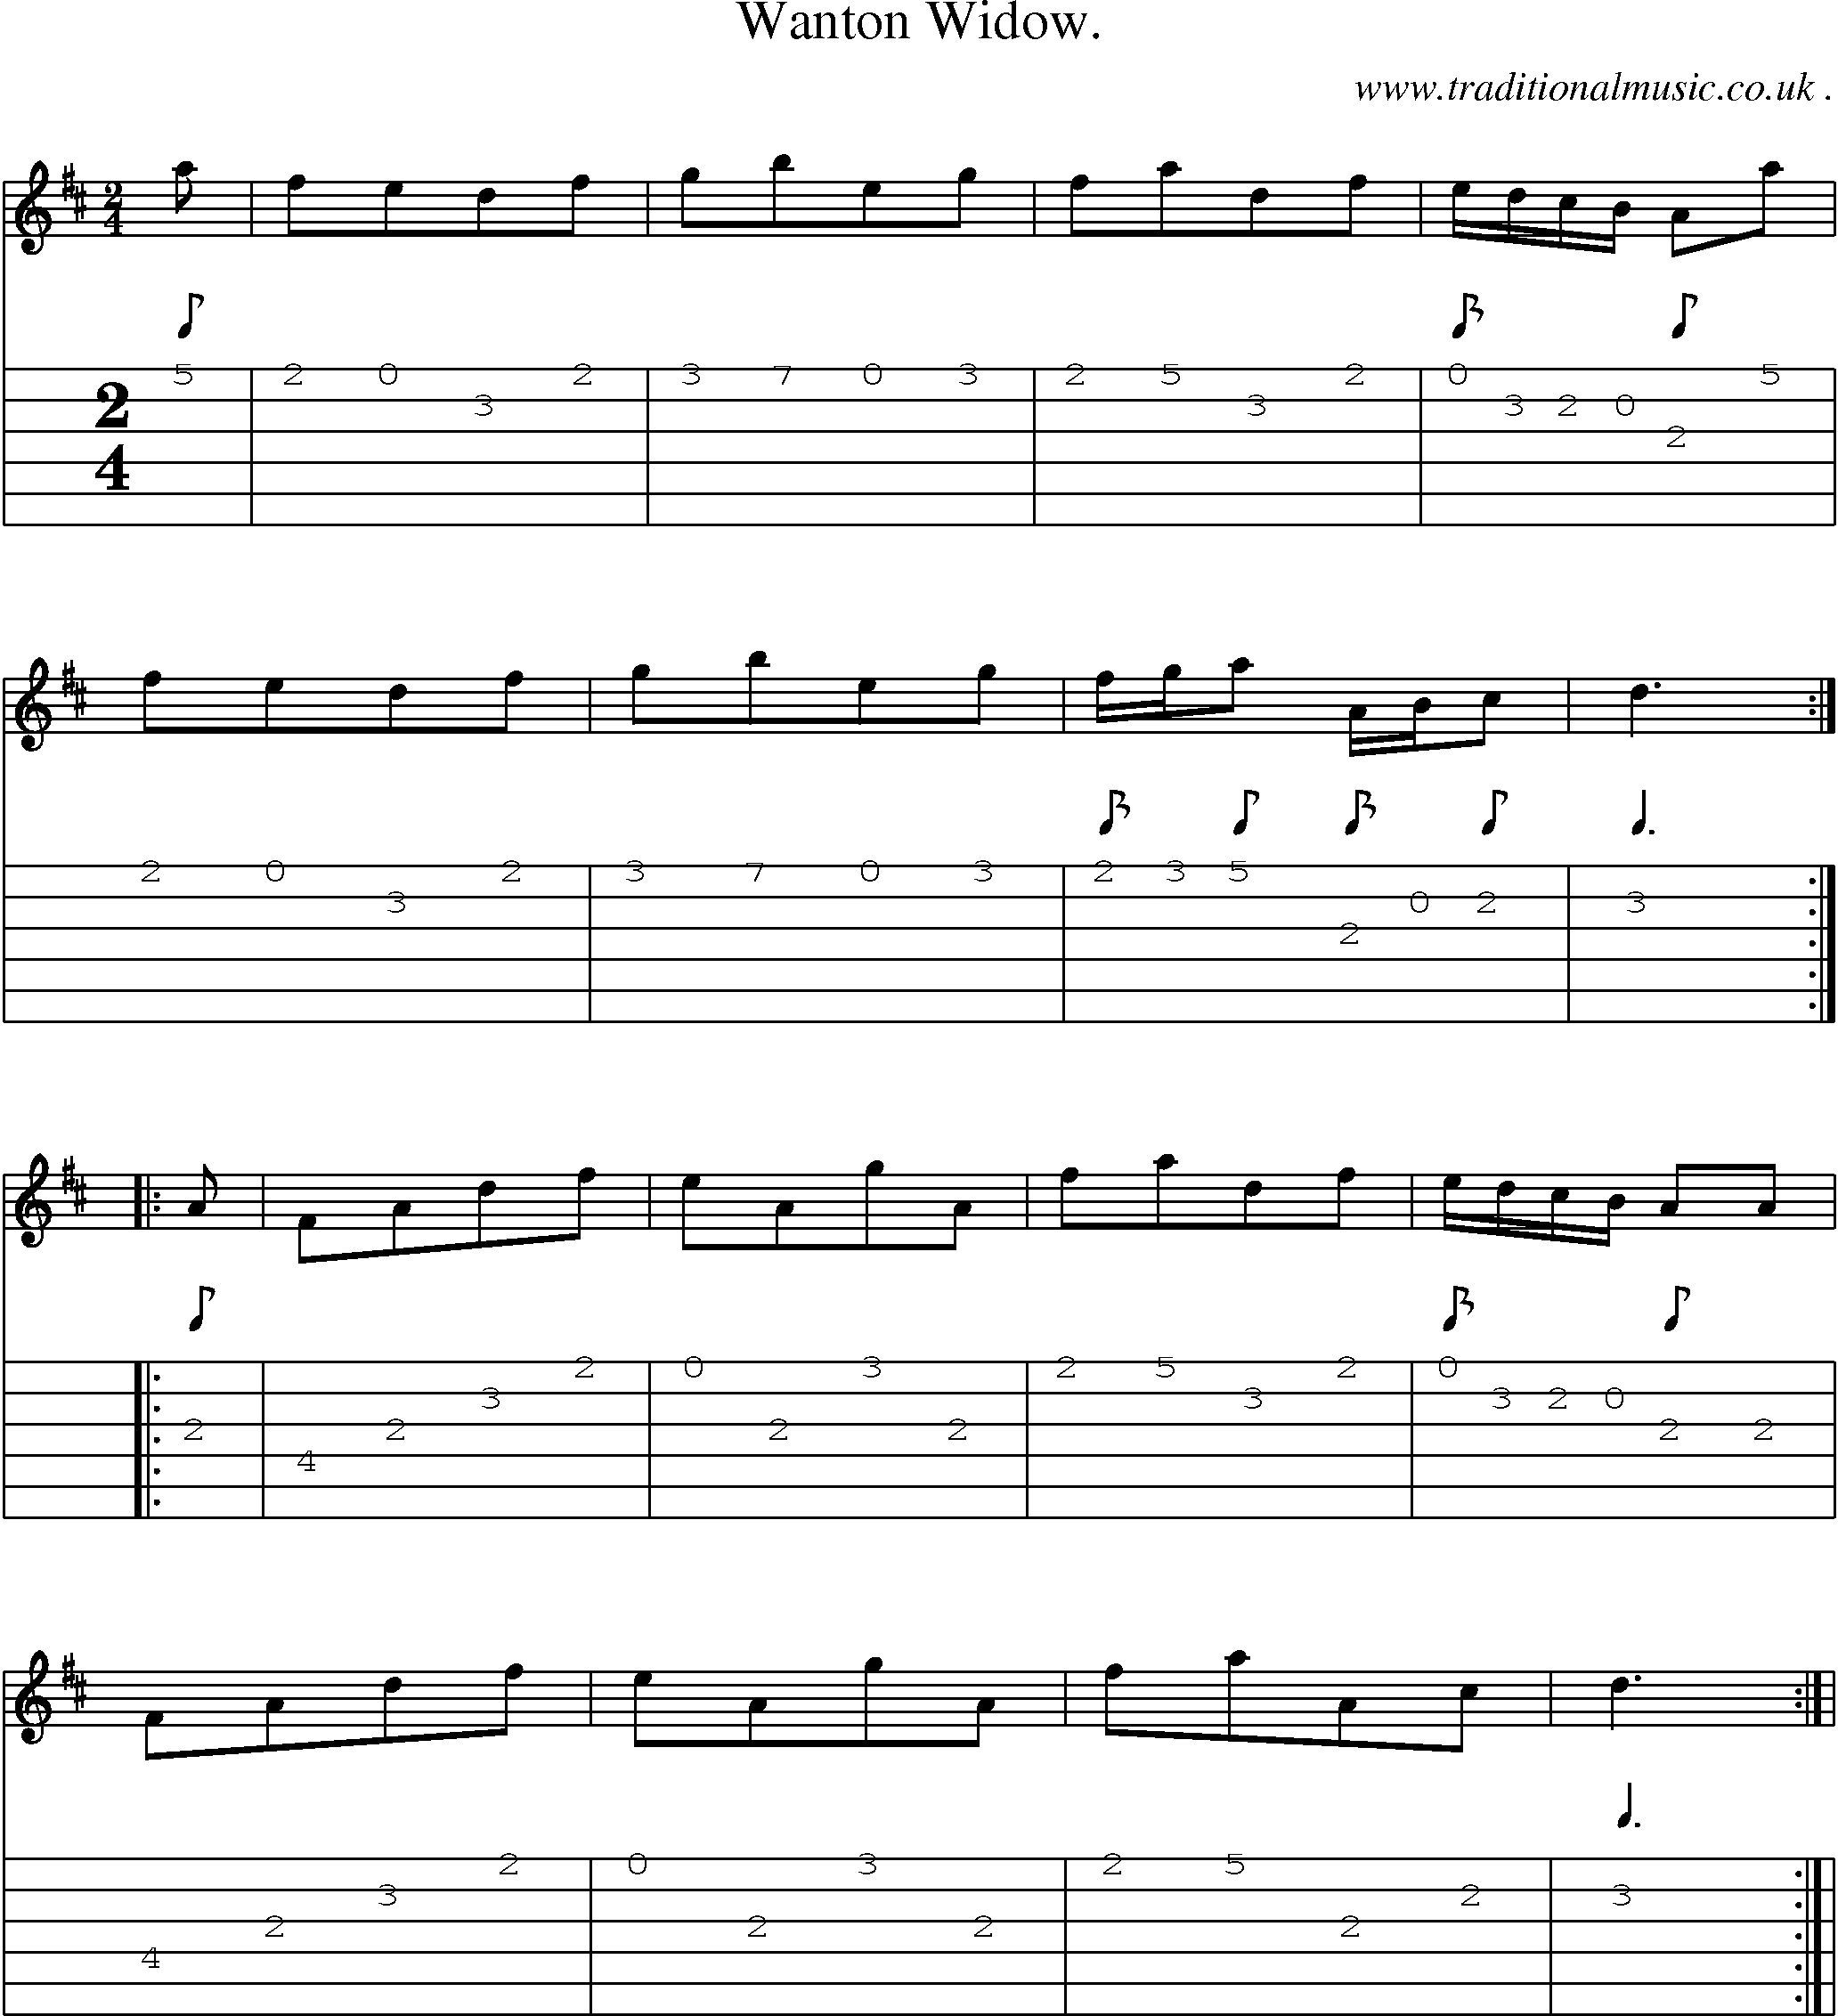 Sheet-Music and Guitar Tabs for Wanton Widow